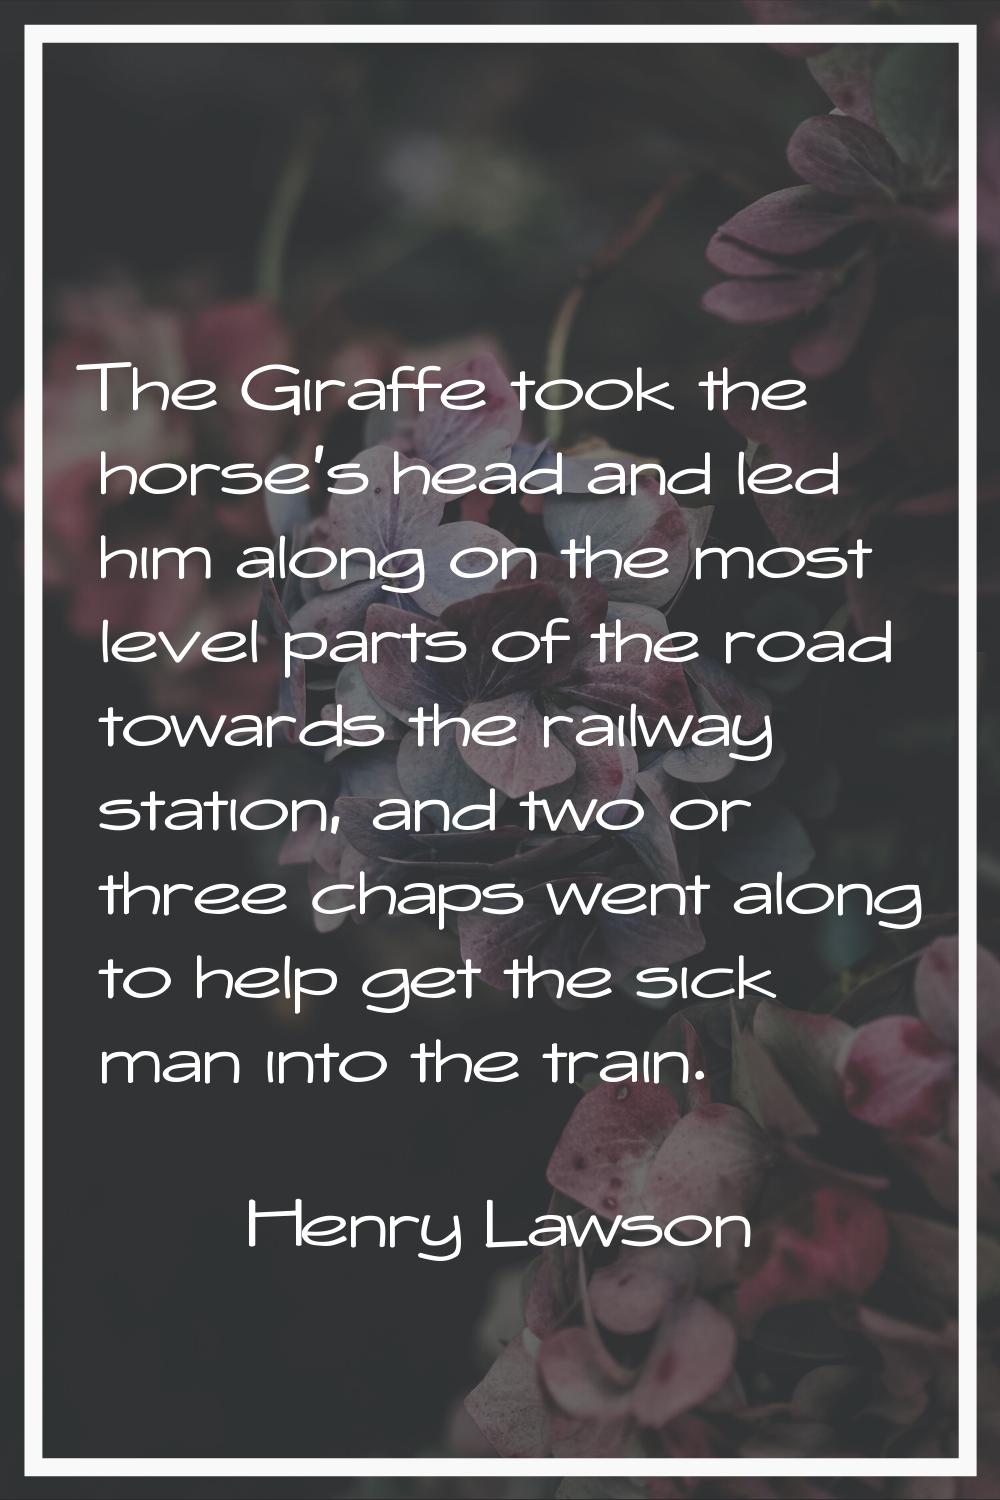 The Giraffe took the horse's head and led him along on the most level parts of the road towards the